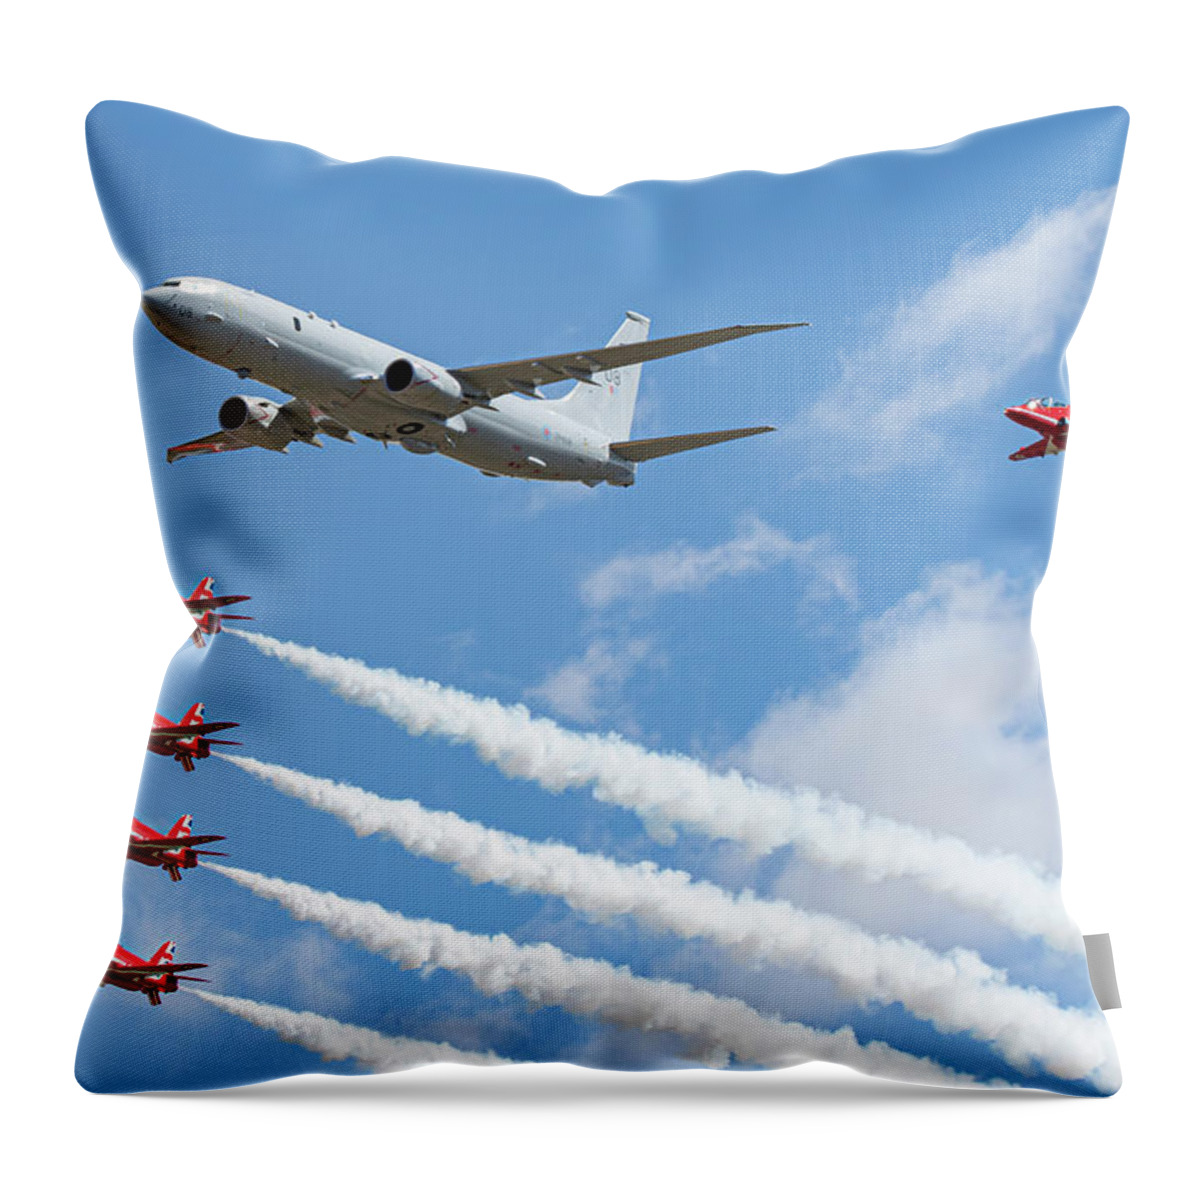 P 8 Poseidon Throw Pillow featuring the photograph Red Arrows and P8 Poseidon by Airpower Art